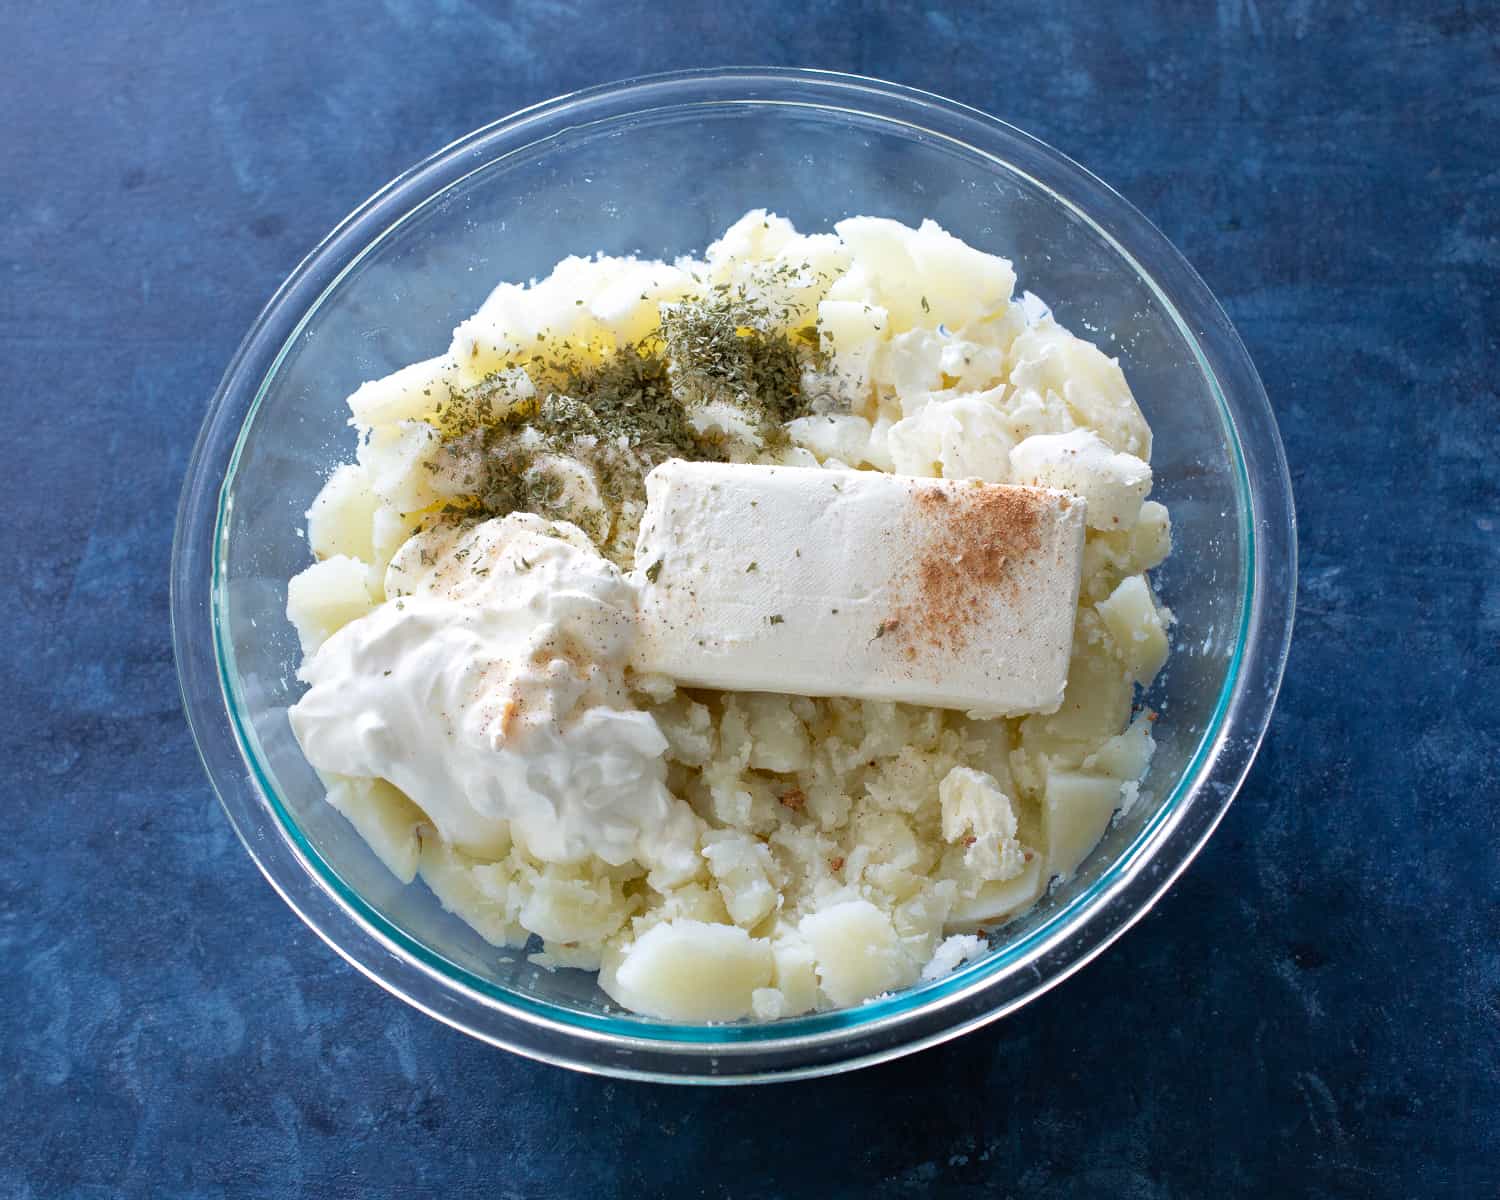 mashed potatoes with cream cheese, sour cream